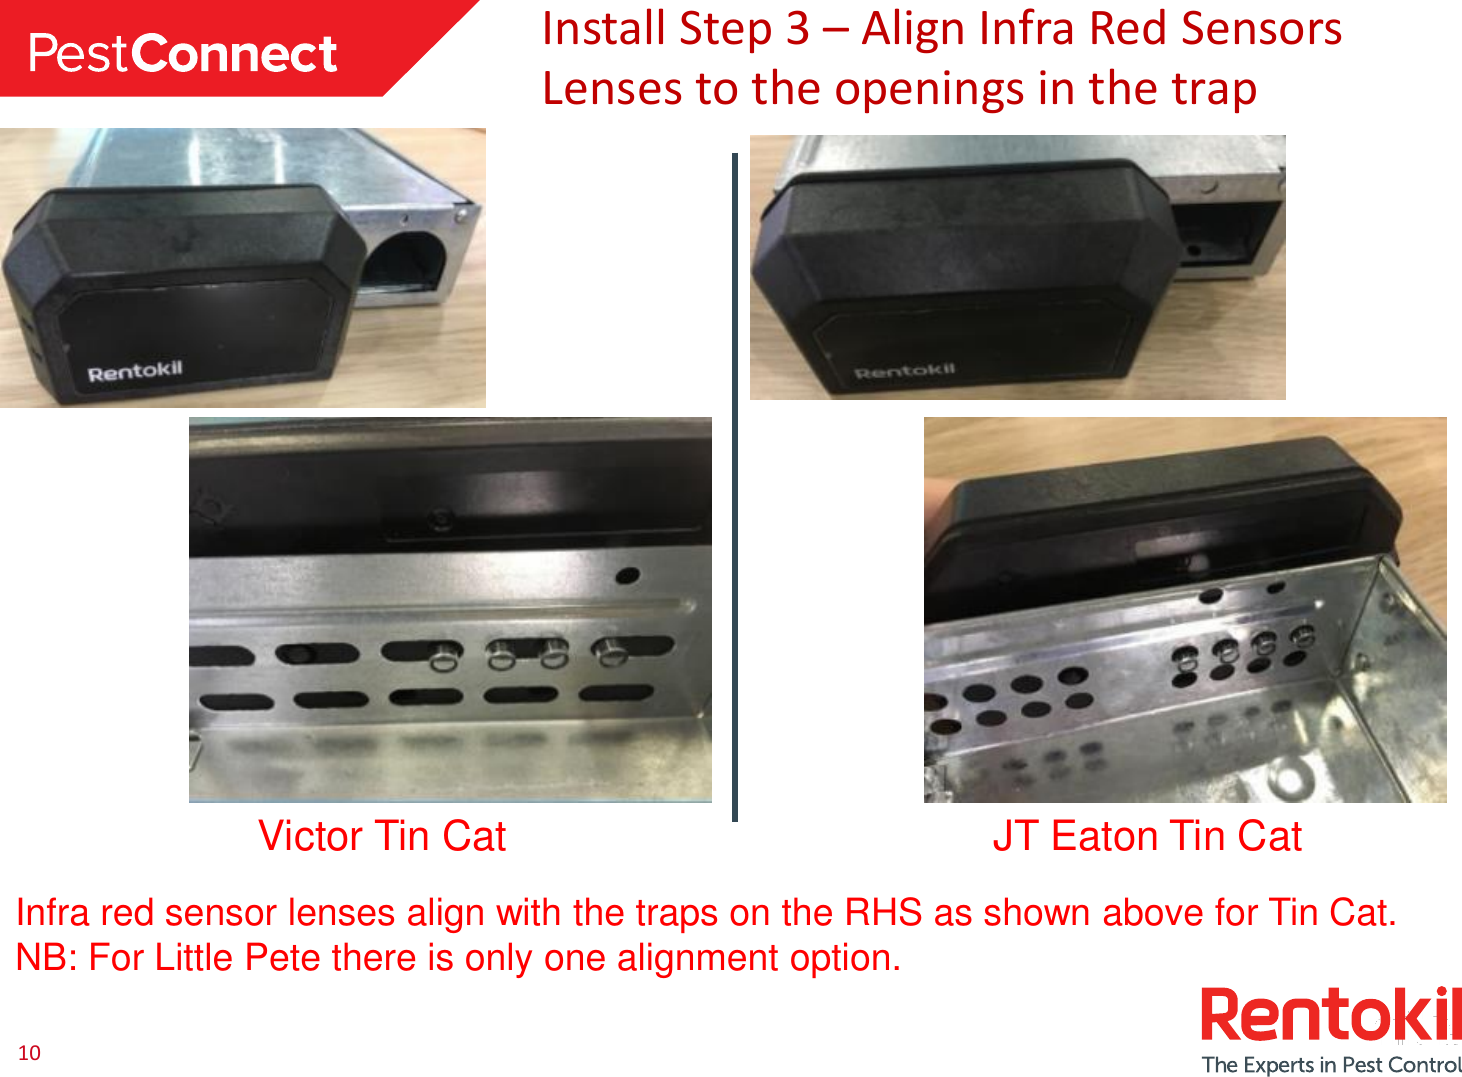 10Install Step 3 –Align Infra Red Sensors Lenses to the openings in the trapInfra red sensor lenses align with the traps on the RHS as shown above for Tin Cat.NB: For Little Pete there is only one alignment option.Victor Tin Cat JT Eaton Tin Cat